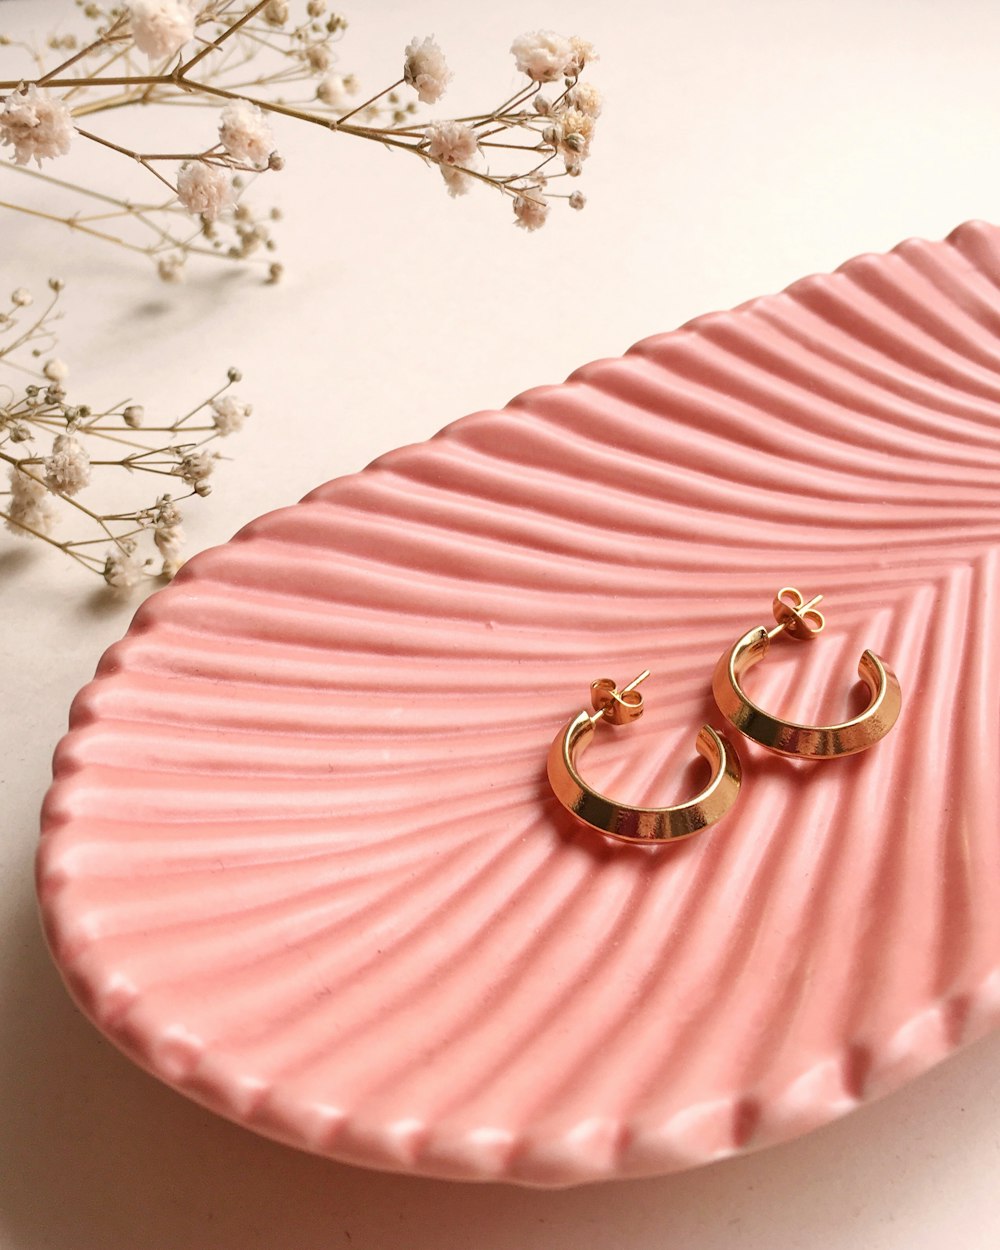 gold and silver rings on pink and white striped textile